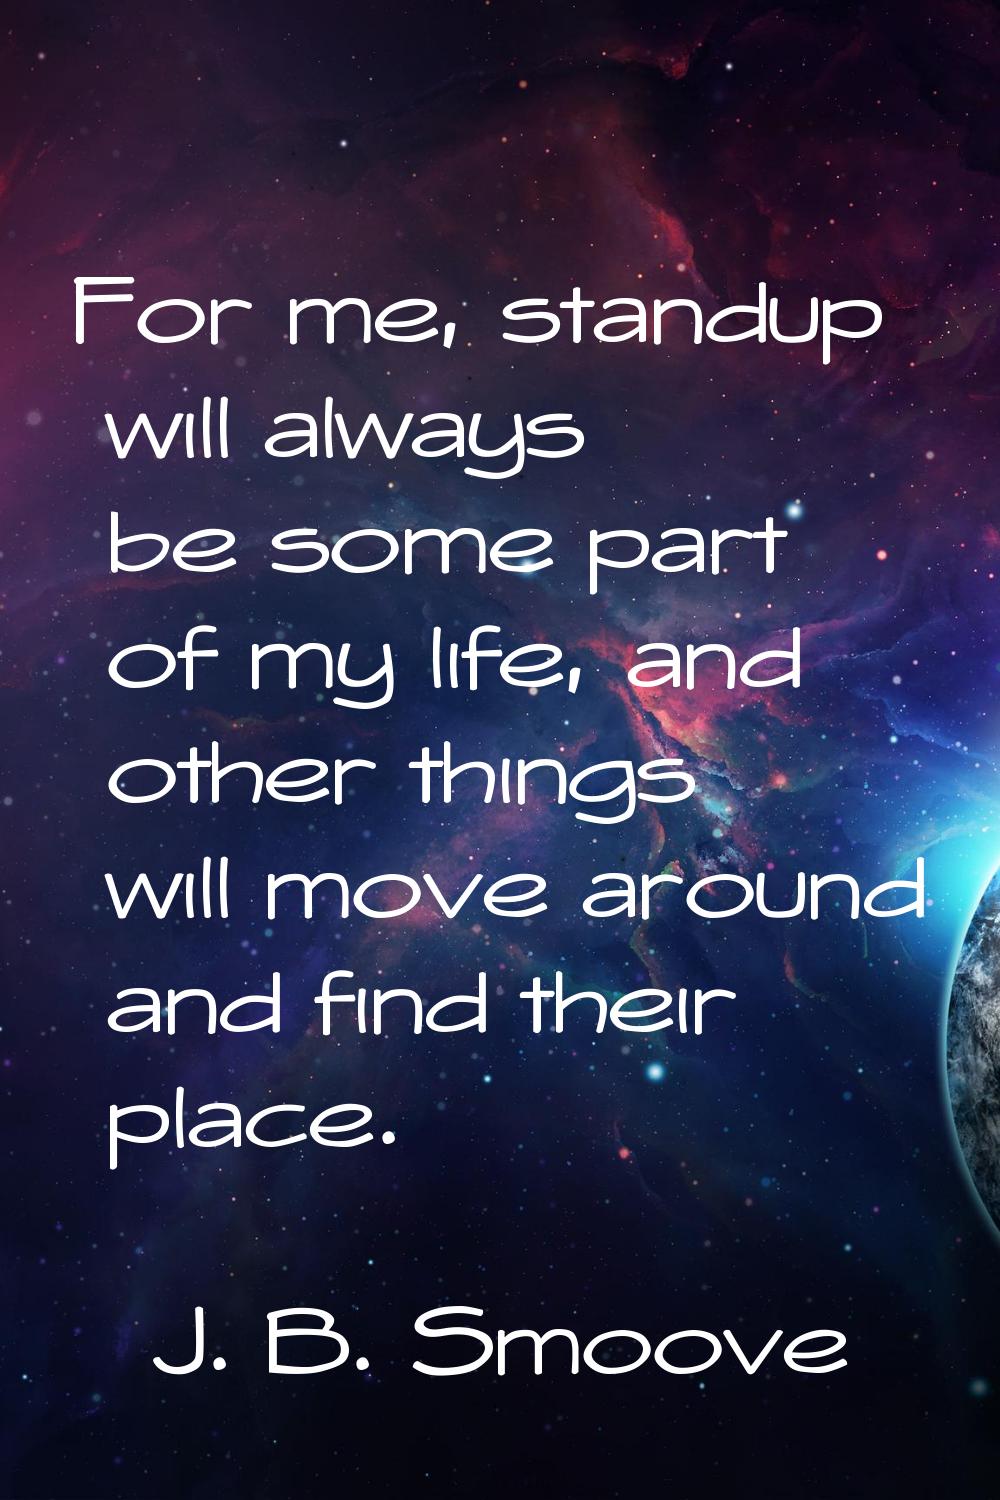 For me, standup will always be some part of my life, and other things will move around and find the